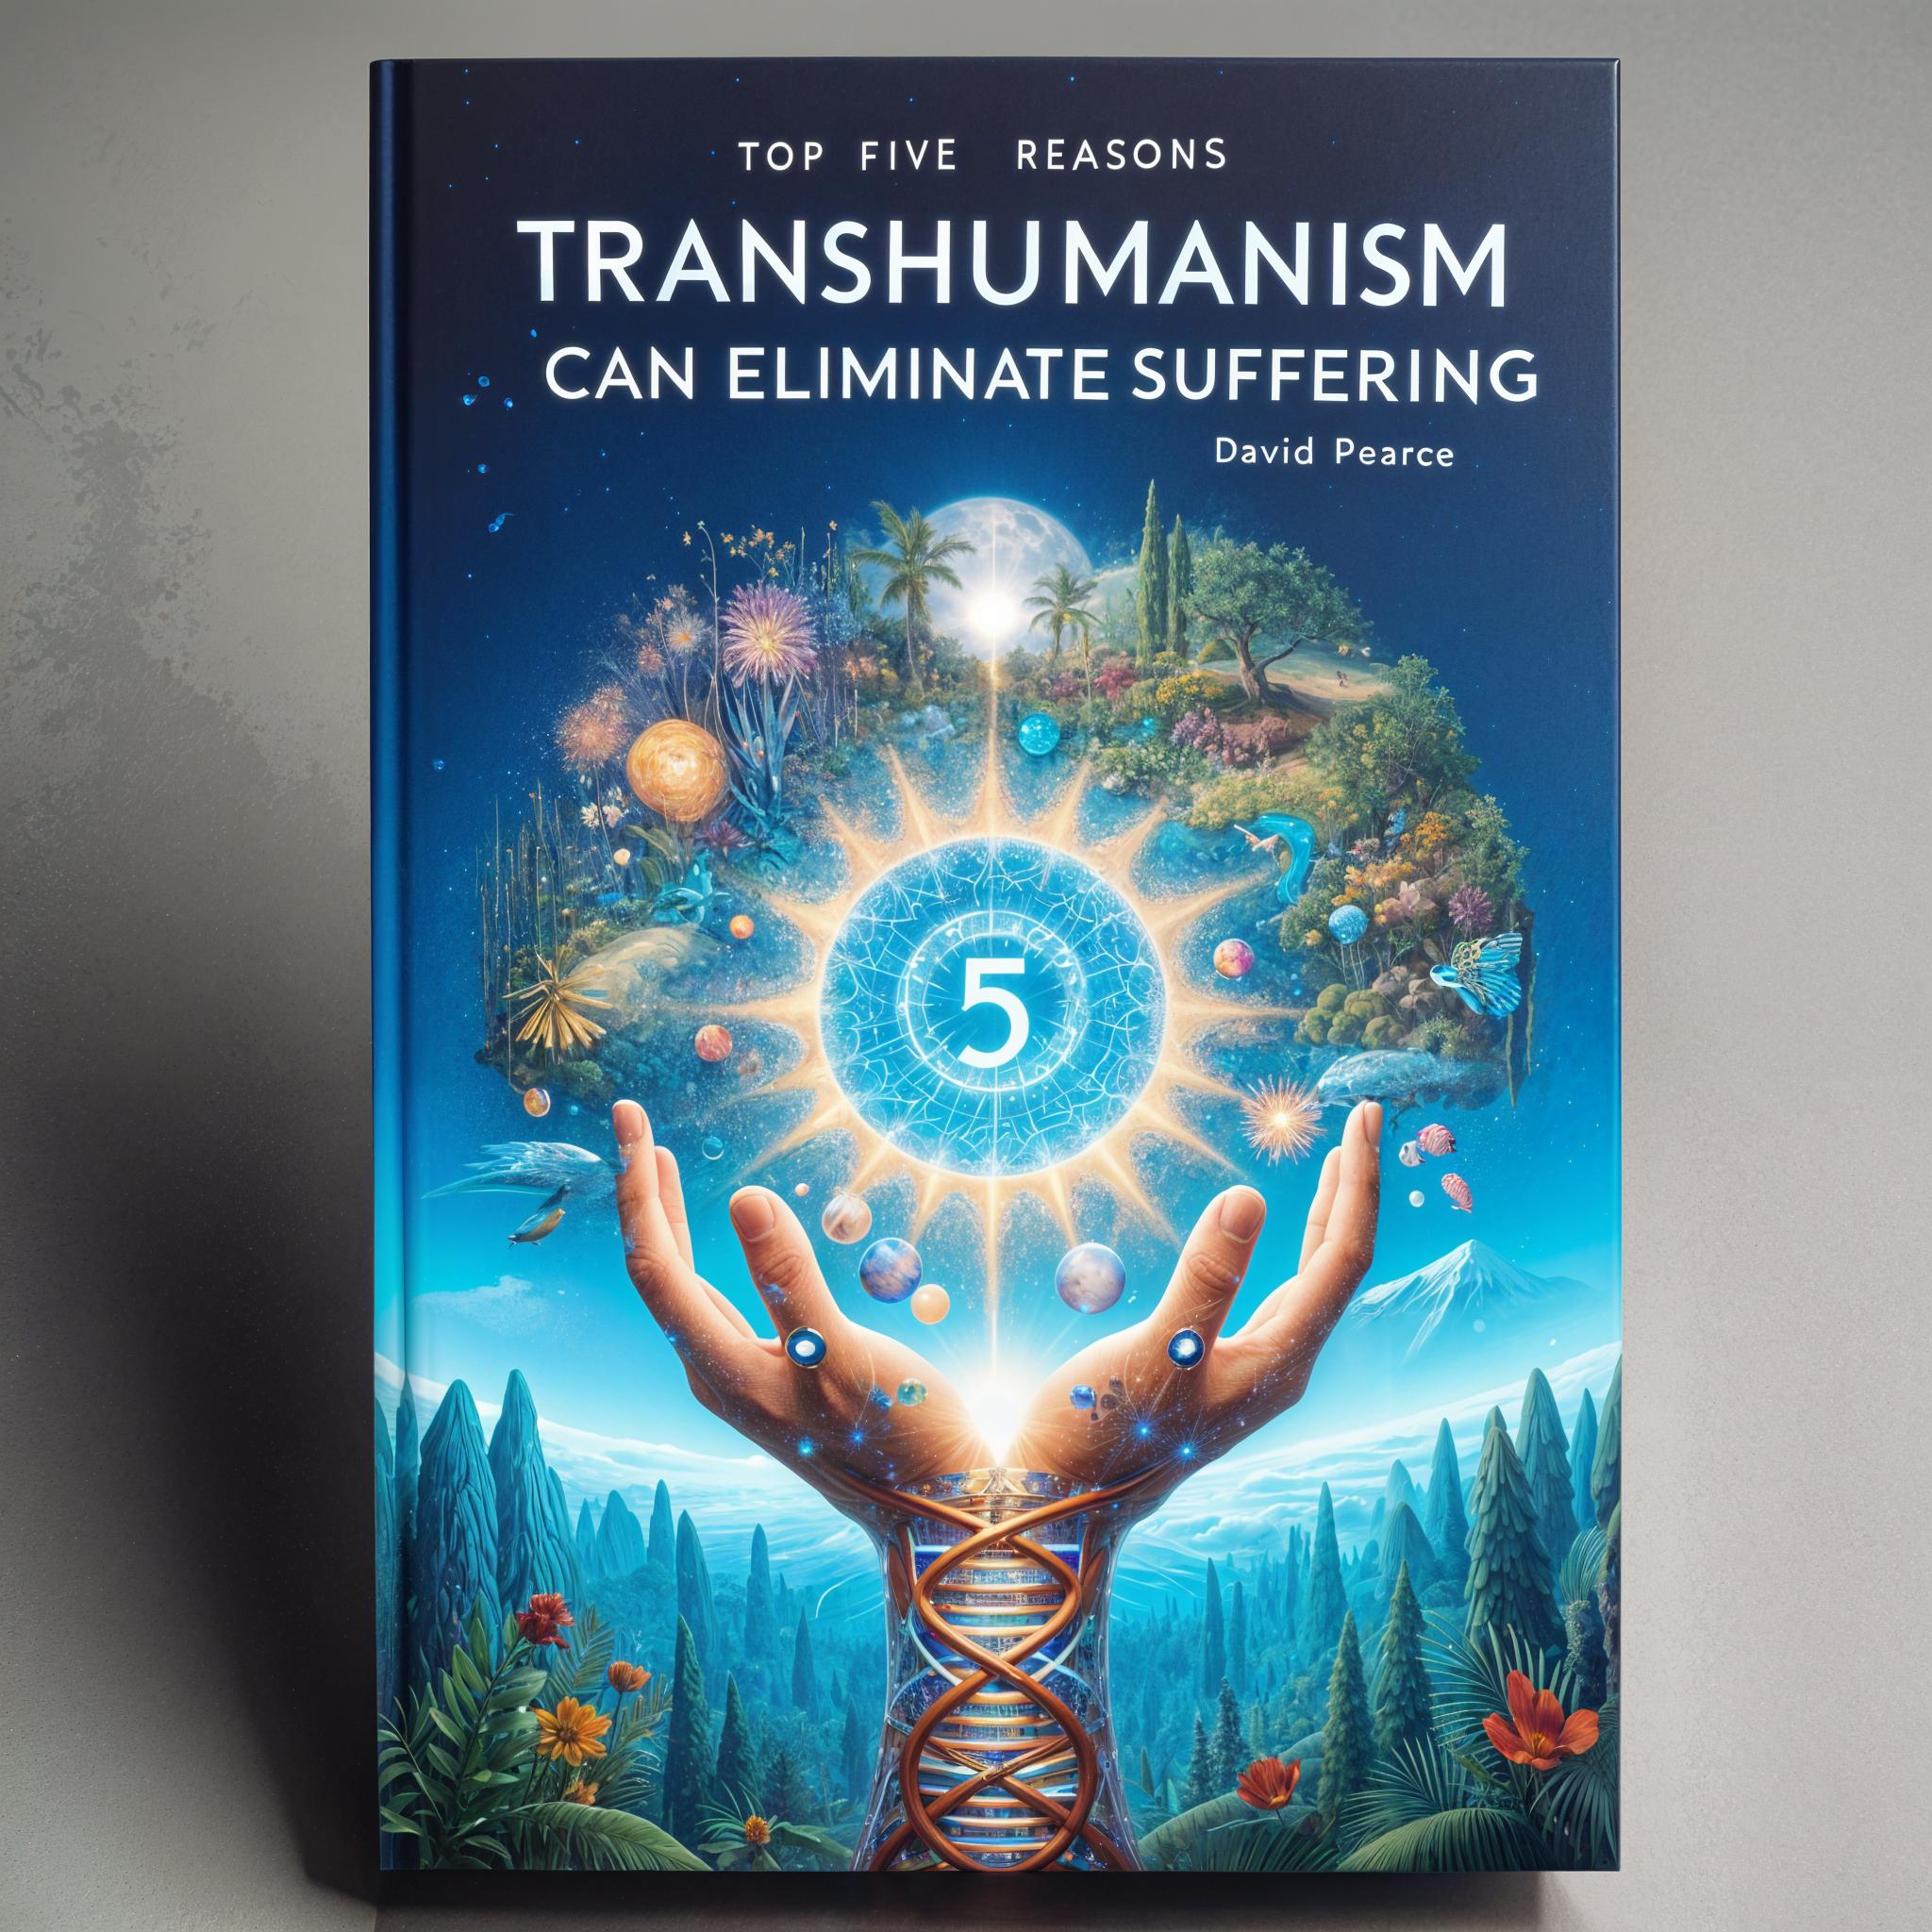 Top Five Reasons Transhumanism Can Eliminate Suffering